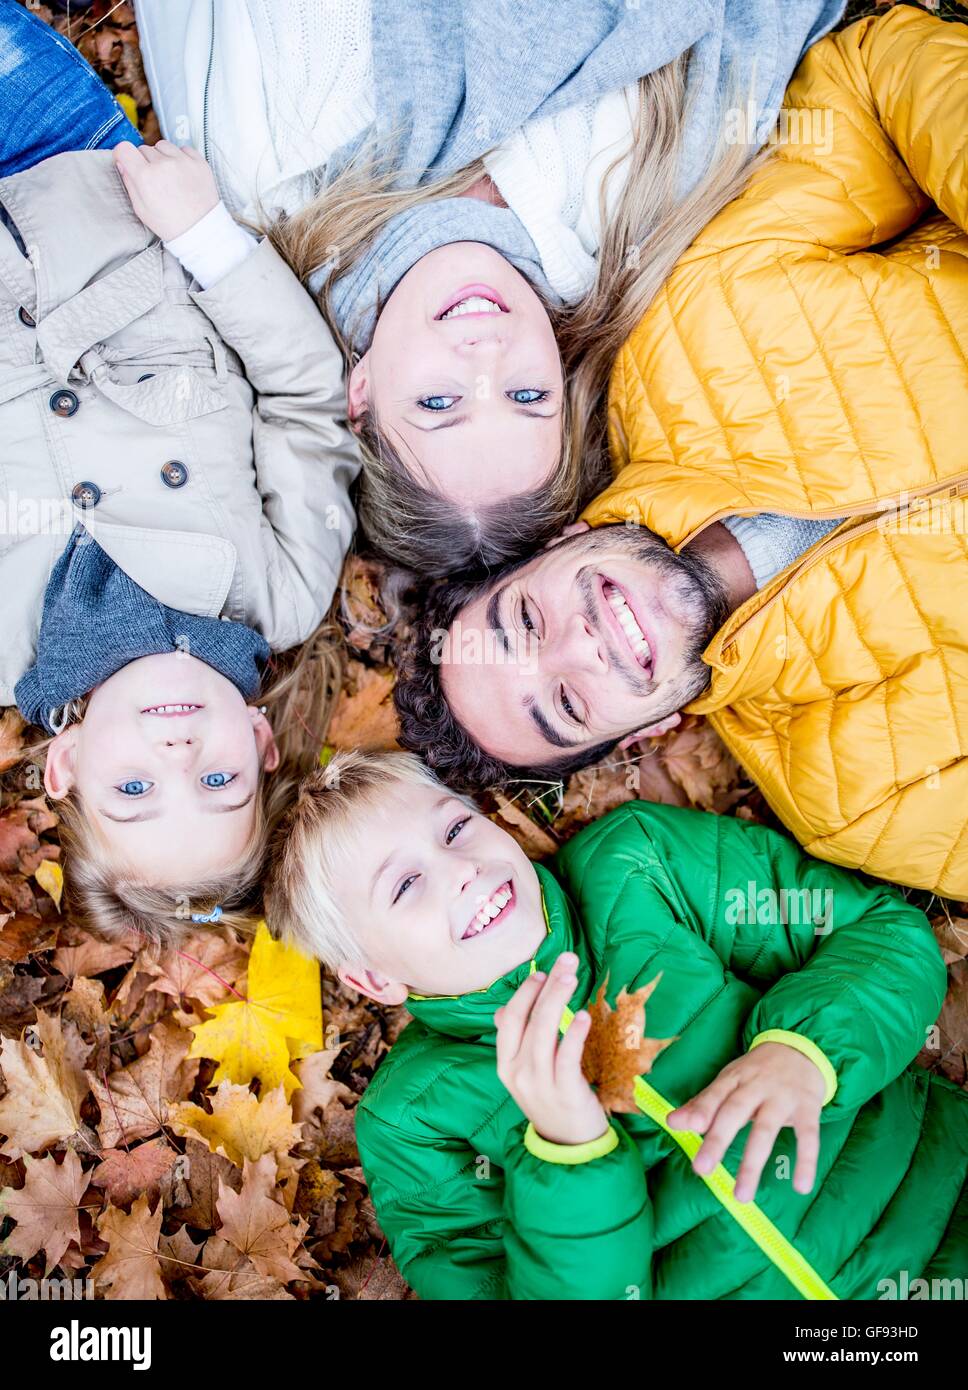 MODEL RELEASED. Family lying on dried leaves in autumn and smiling, portrait. Stock Photo